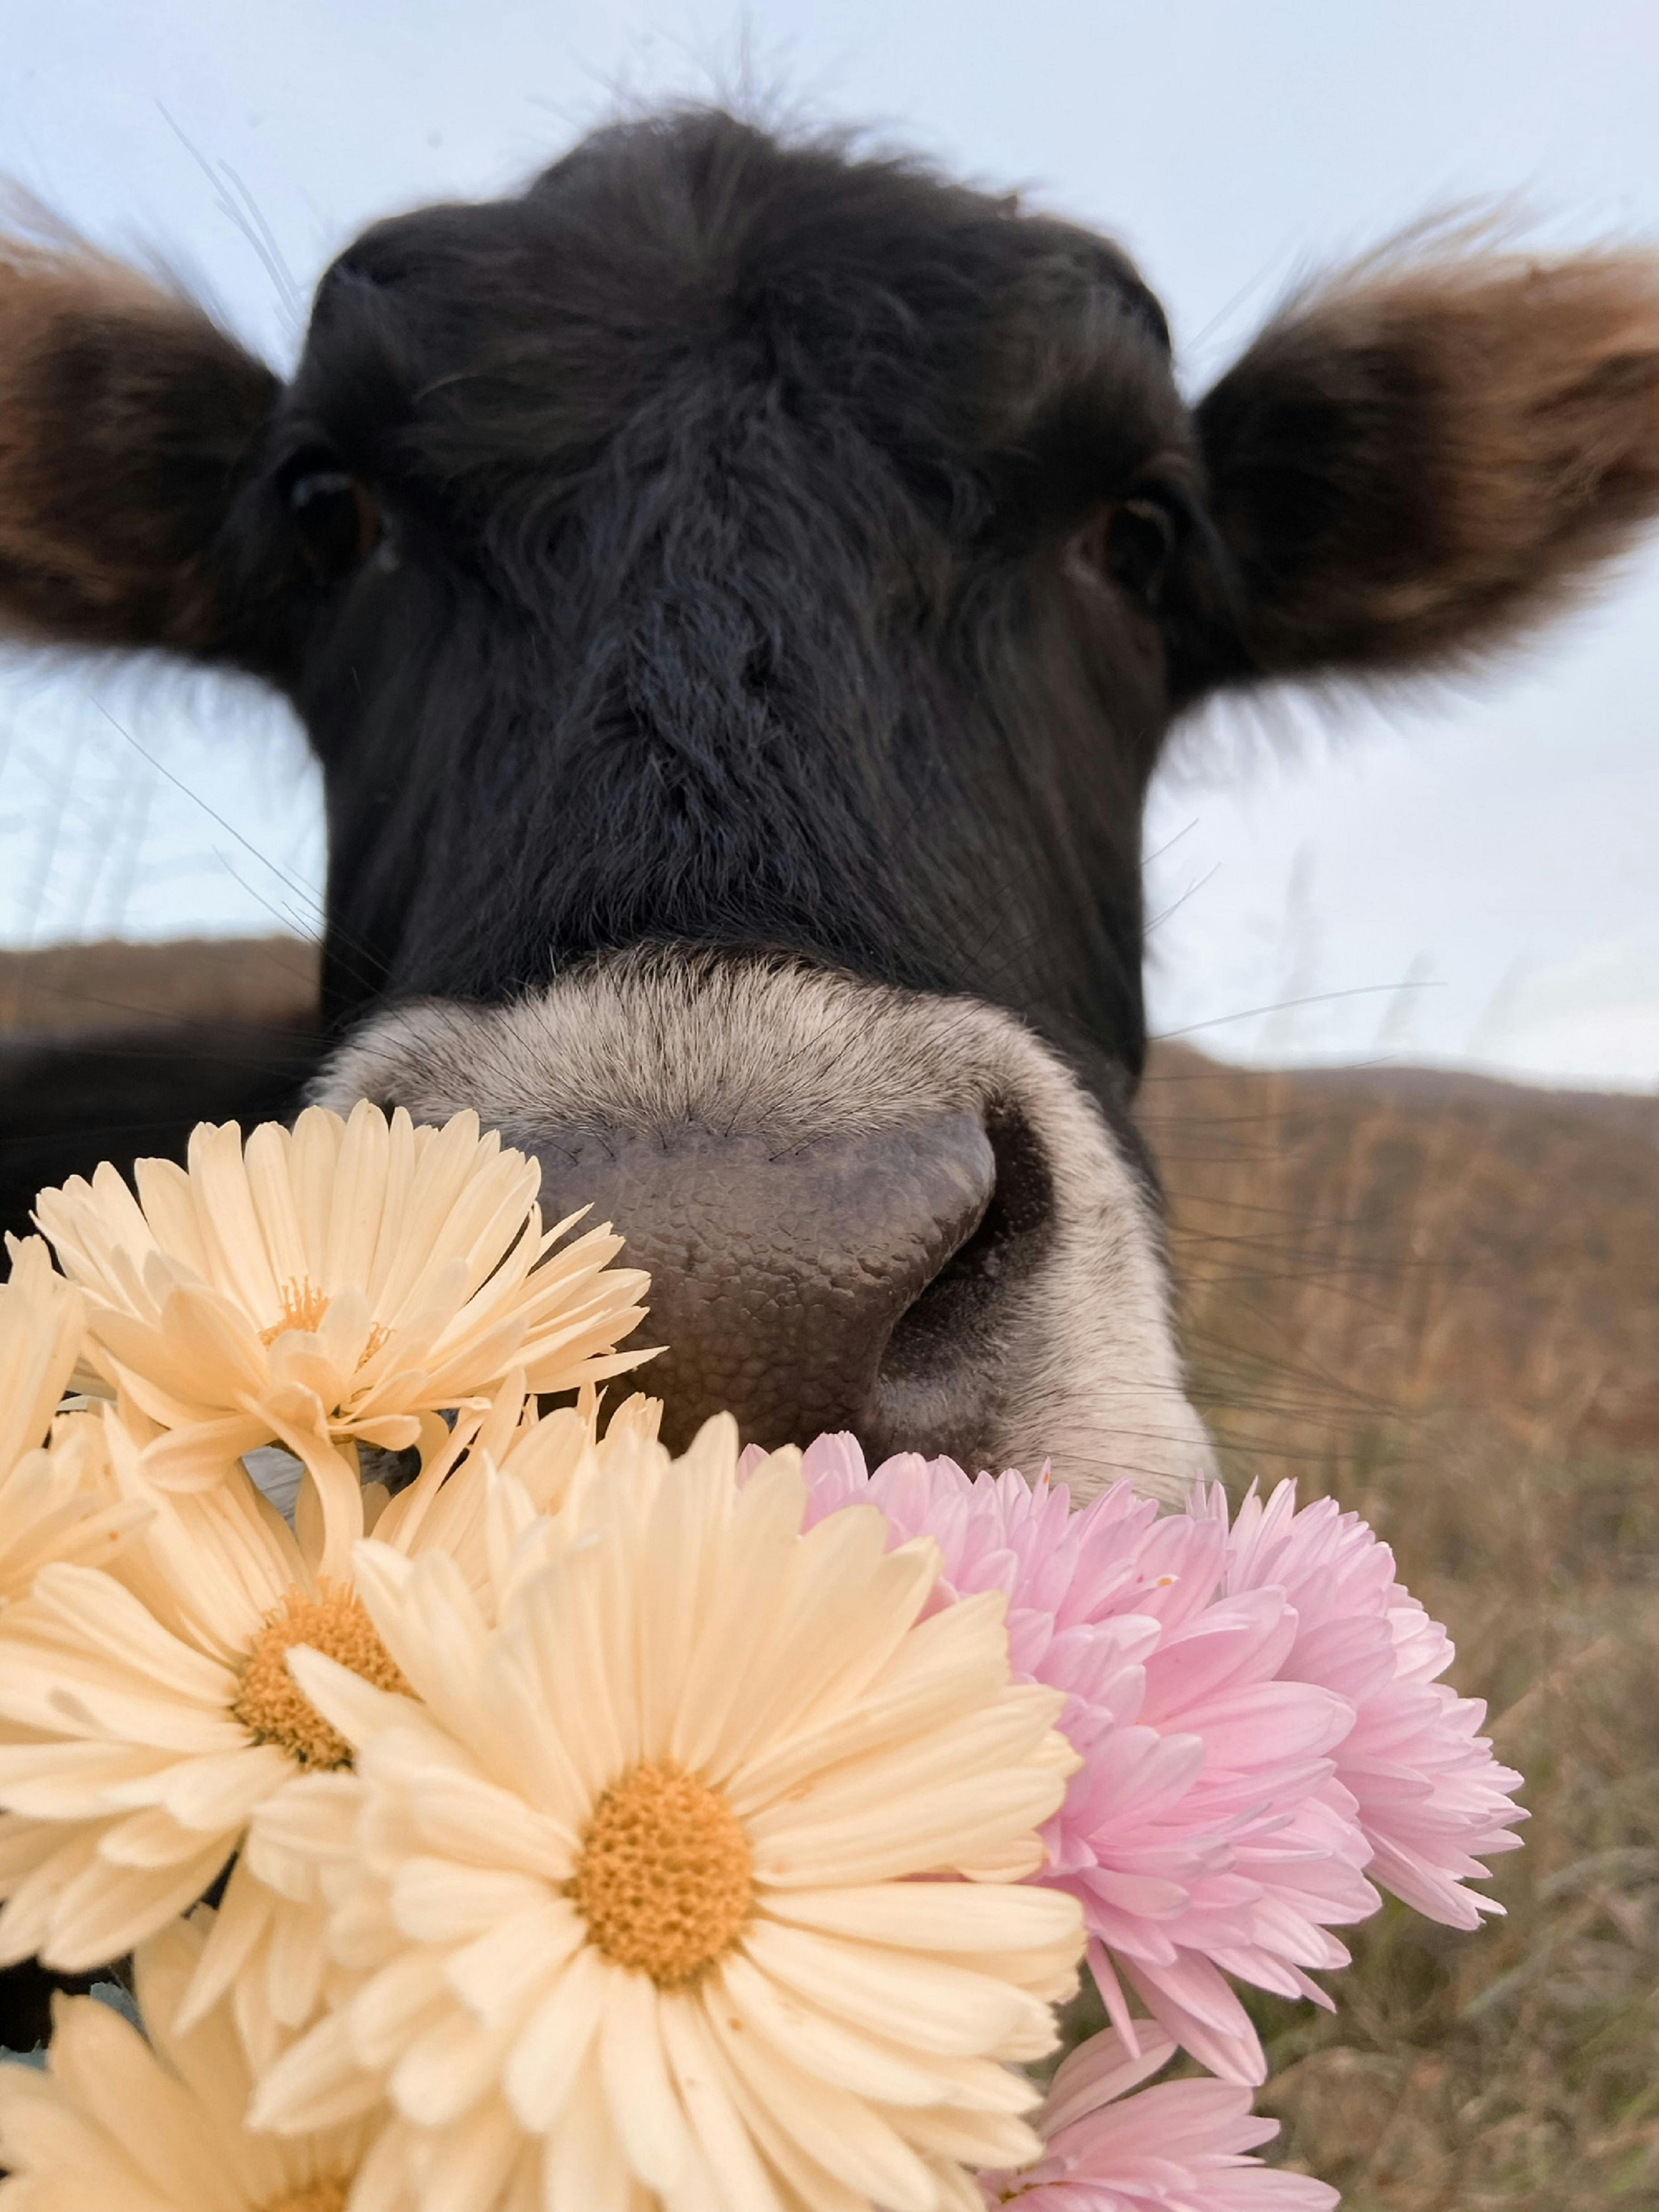 Bovine Photos, Download The BEST Free Bovine Stock Photos & HD Images